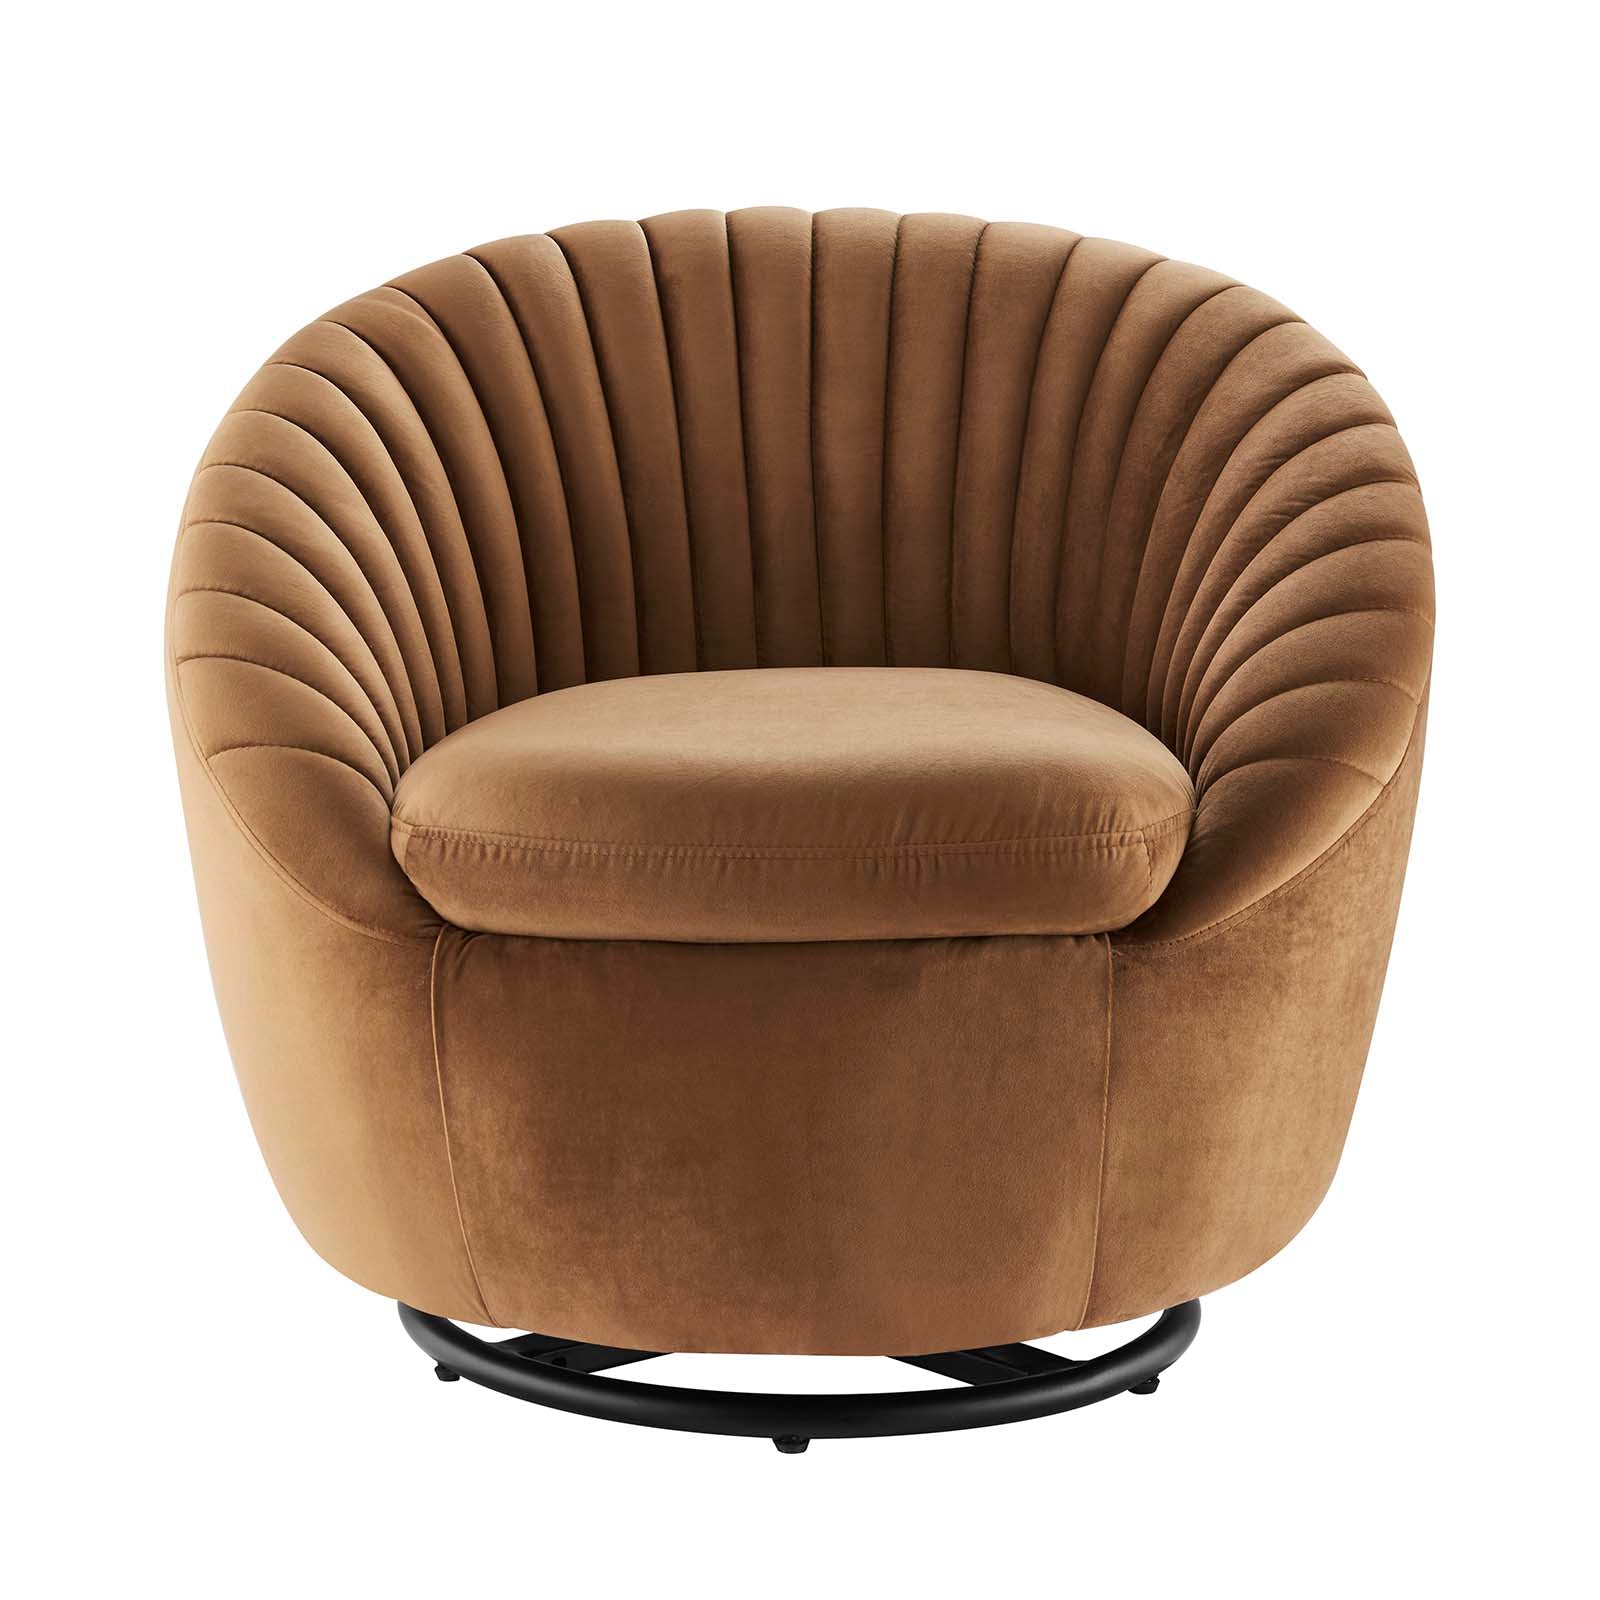 Modway Accent Chairs - Whirr Tufted Performance Velvet Performance Velvet Swivel Chair Black Cognac